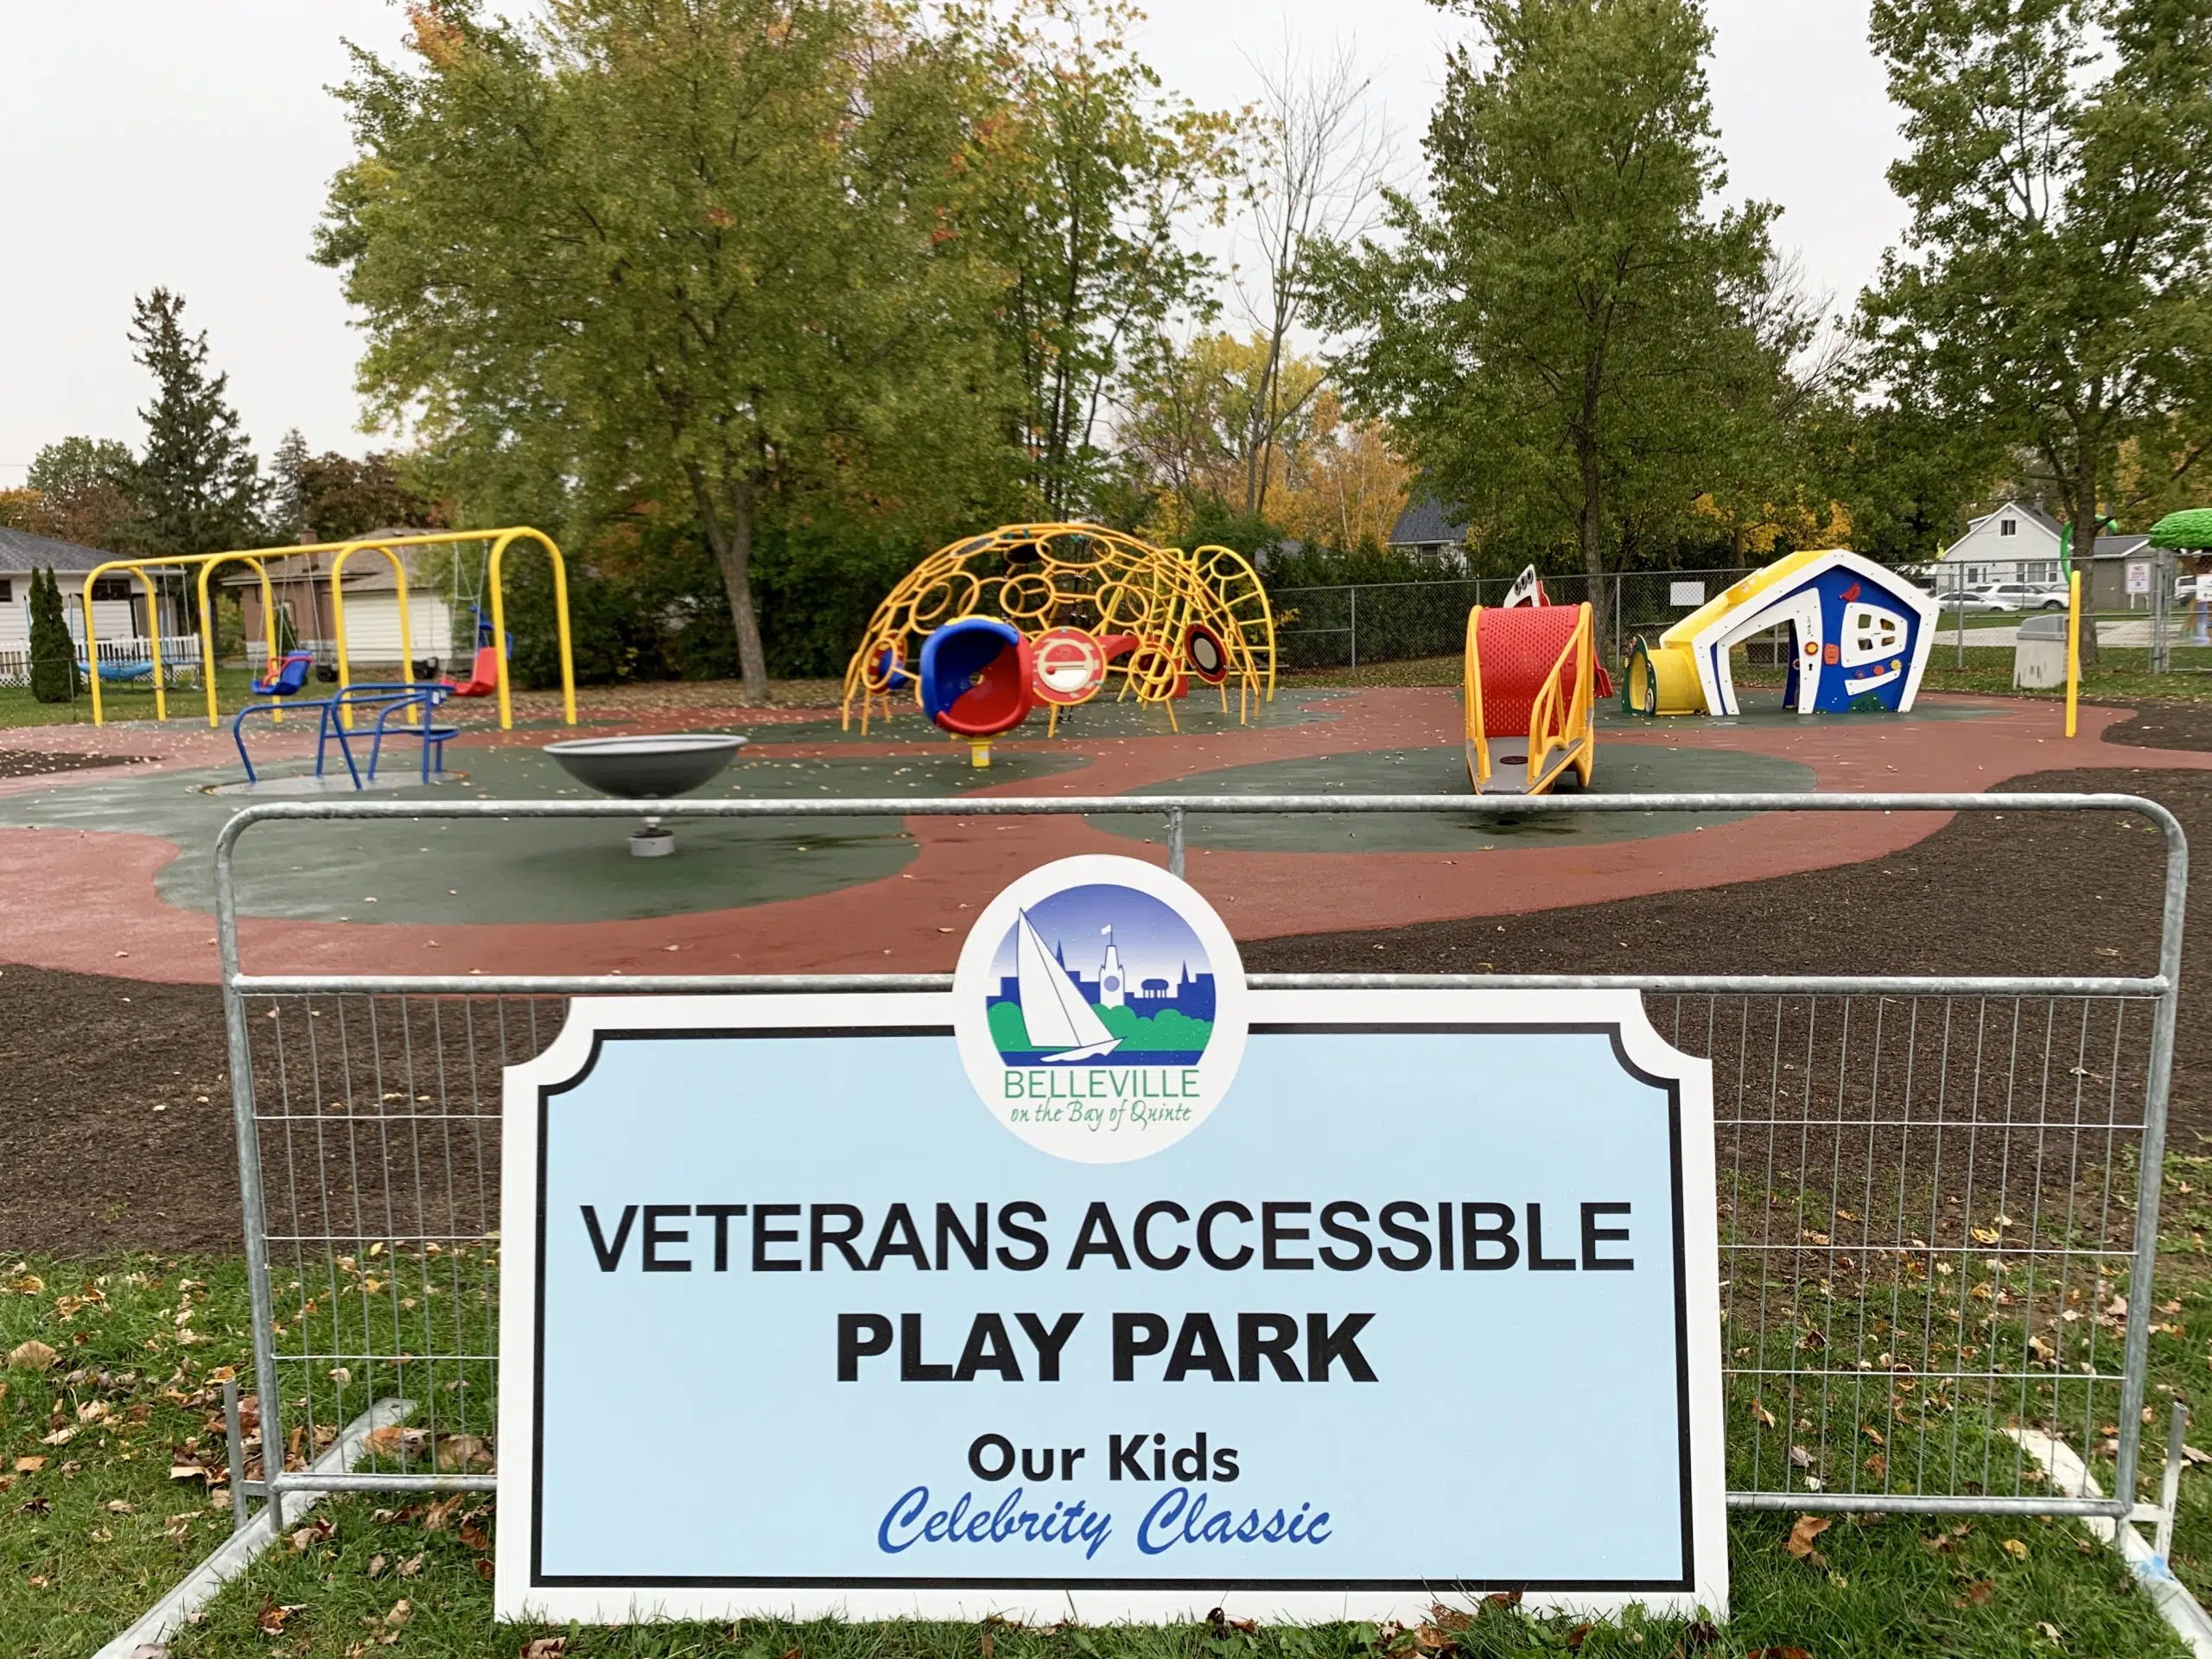 Veterans accessible playground officially opened